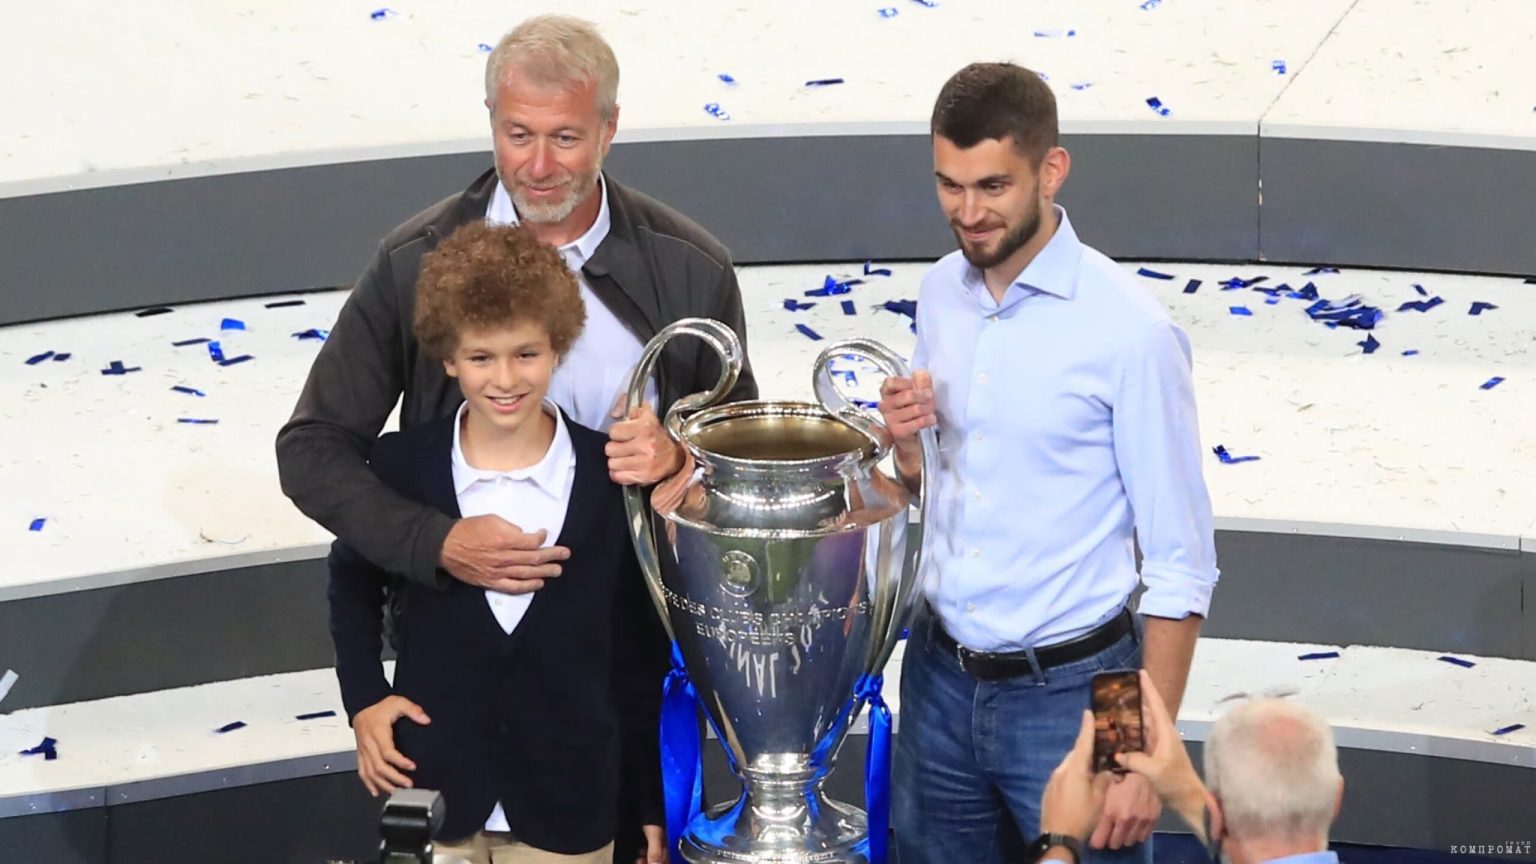 Roman Abramovich Transferred 10 Funds With Assets Valued At Least $4 Billion To His Children At The Beginning Of February 2022.